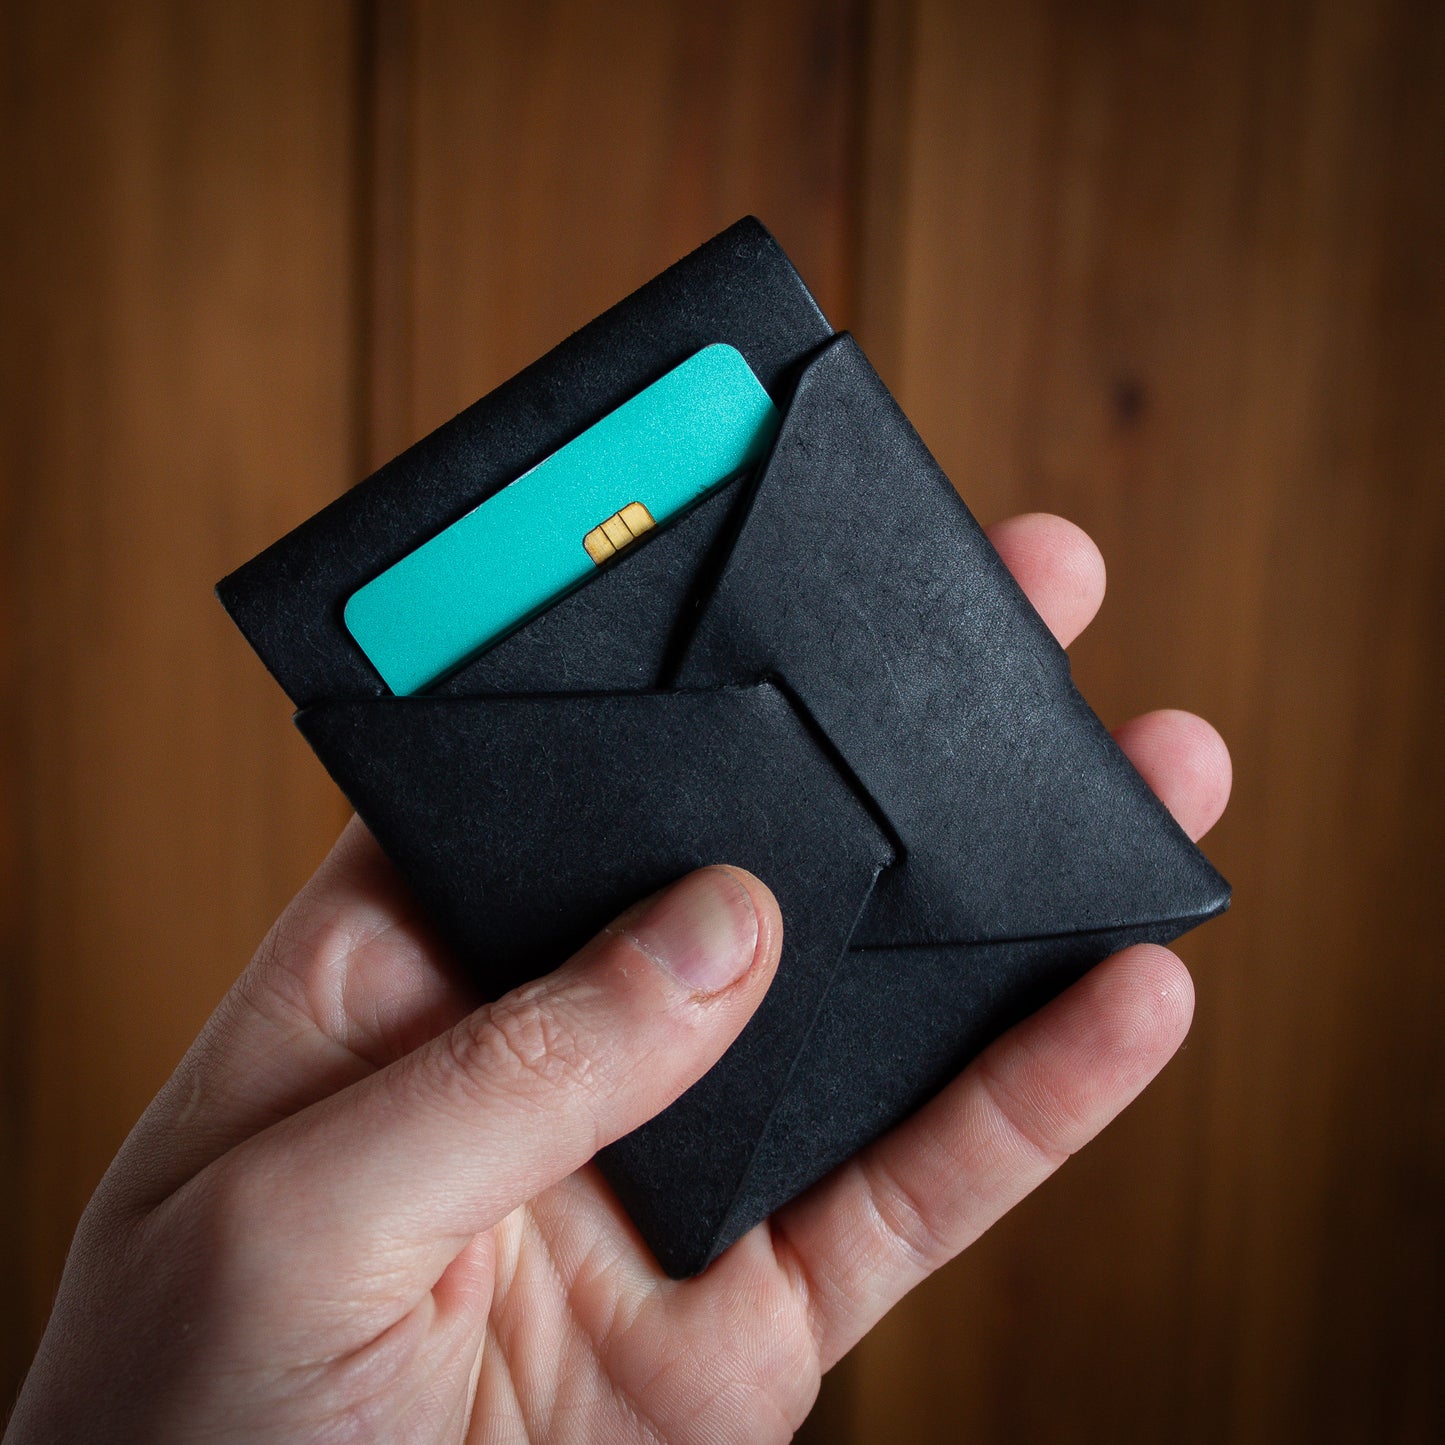 Stitchless EDC black wallet - Reverse side quick access card slot and stingless tab